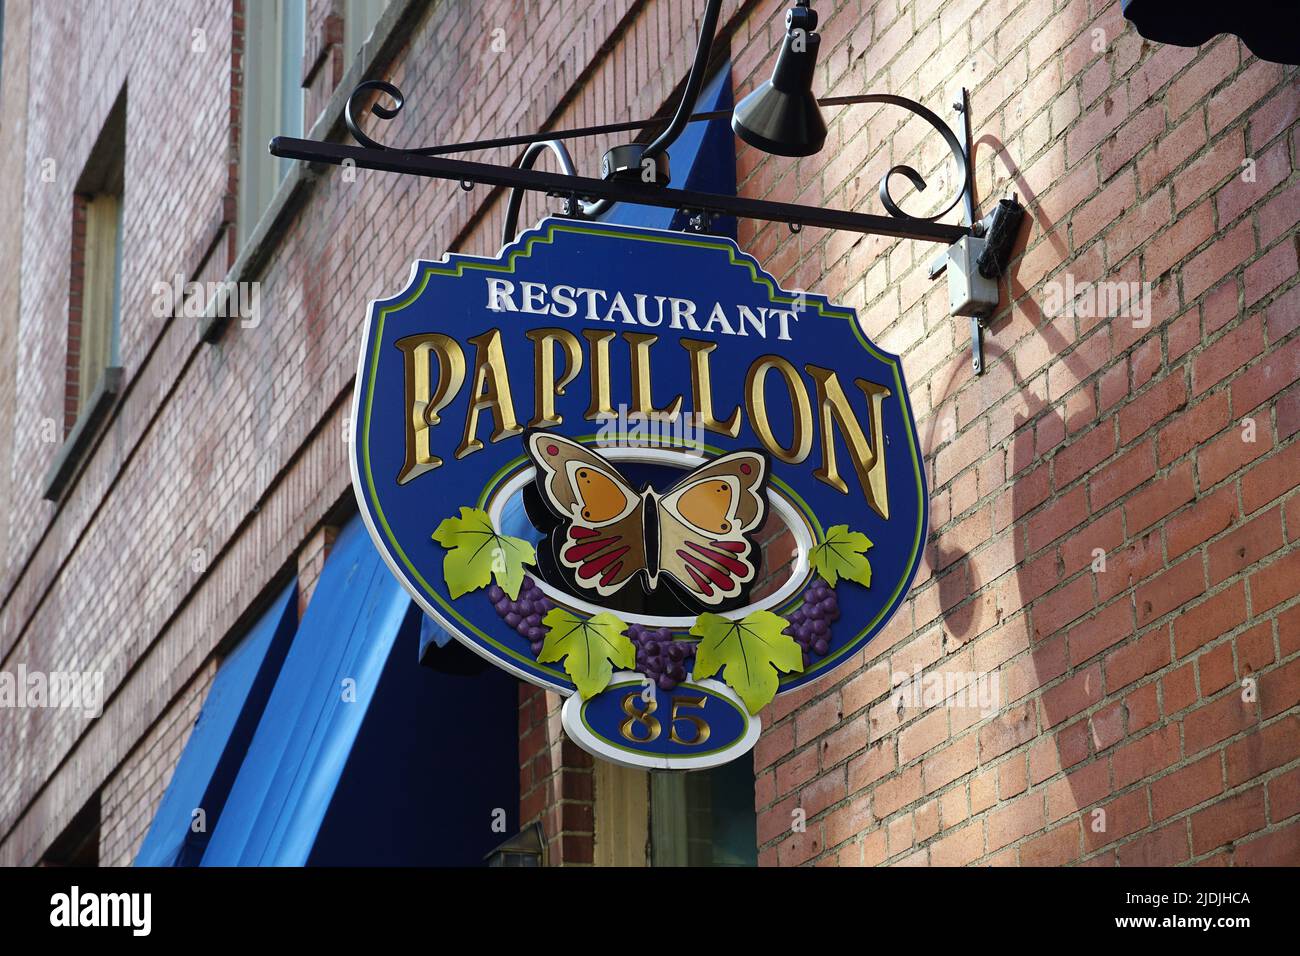 Sign of Restaurant Papillon, Montreal, Quebec province, Canada, North America Stock Photo